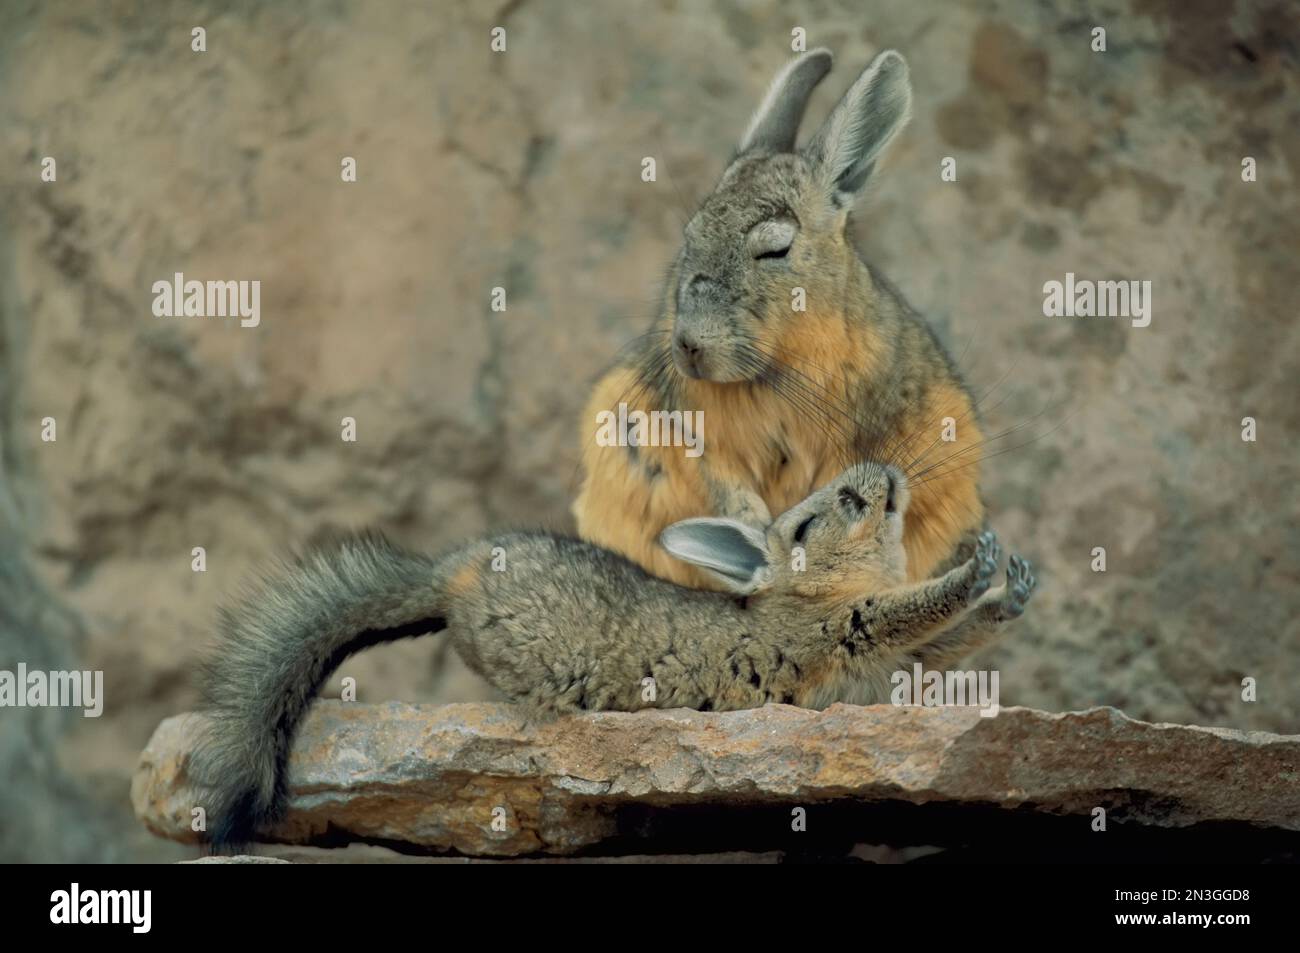 Baby viscacha in full stretch in front of its resting mother; Atacama Desert, Chile Stock Photo